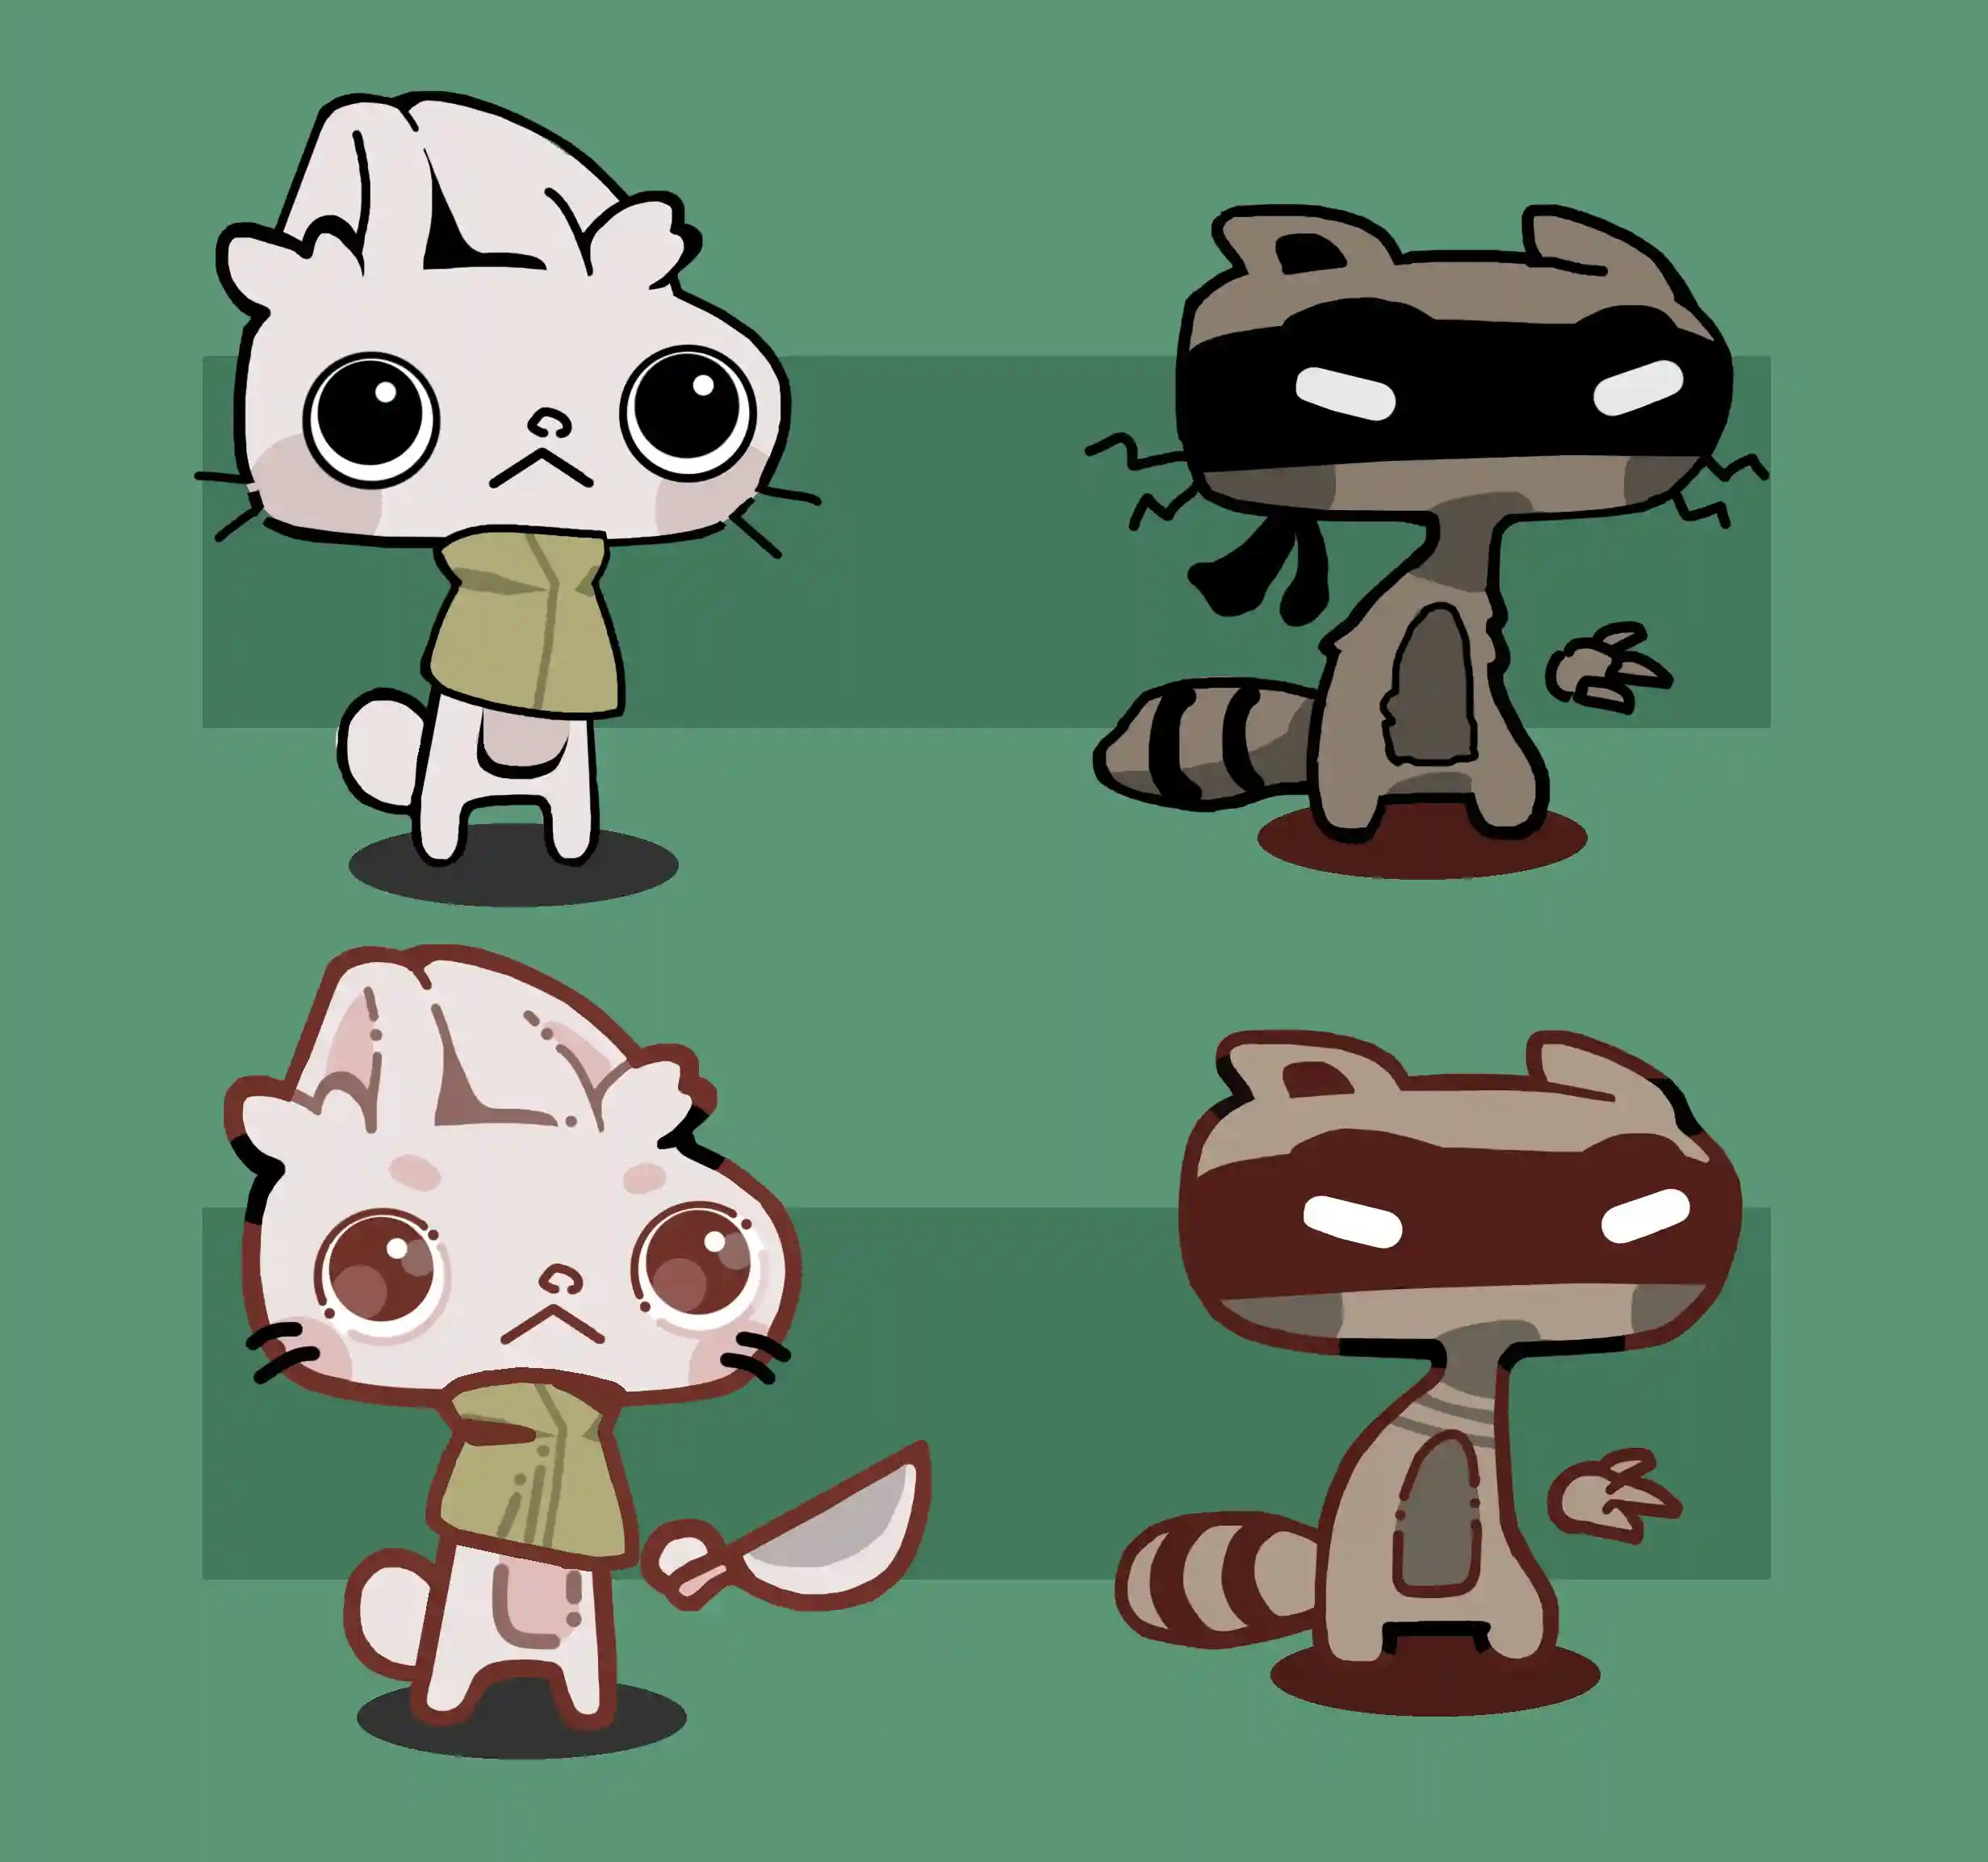 Visual comparison of the rabbit and the raccoon characters from the game in the old and the new style.